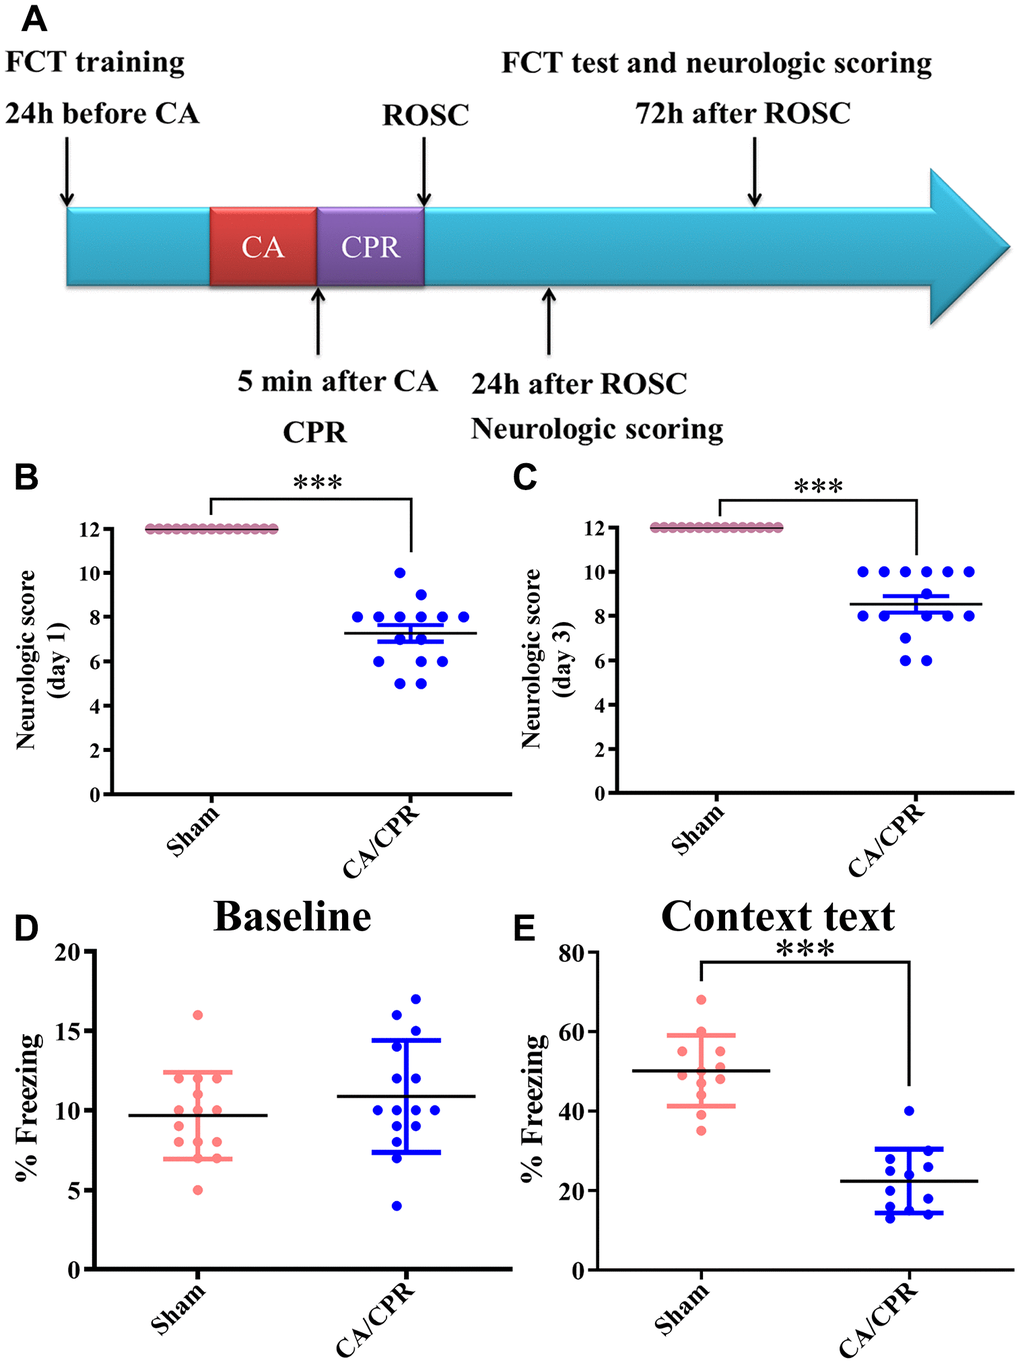 Neurological function was severely impaired in mice after CA/CPR. (A). Scheme of the experimental design. (B, C). Day 1 (B) and day 3 (C) average neurologic scores after ROSC. (D). Baseline freezing levels in the two groups. (E). Freezing levels of context text on day 3 after resuscitation. n=15 per group. ***P 